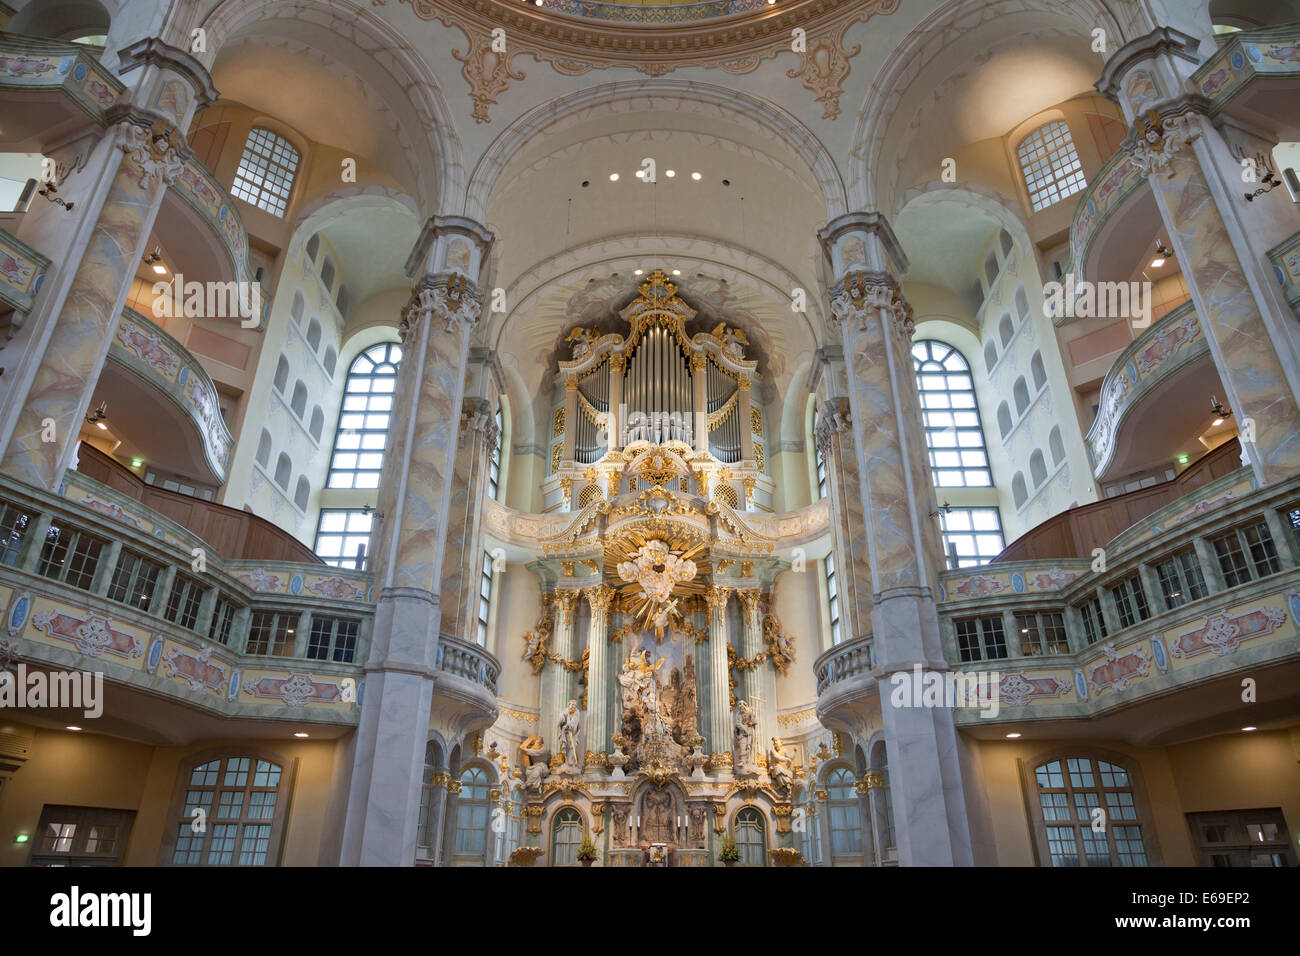 interior view with altar of the church Frauenkirche or Church of Our Lady in Dresden, Saxony, Germany, Europe Stock Photo